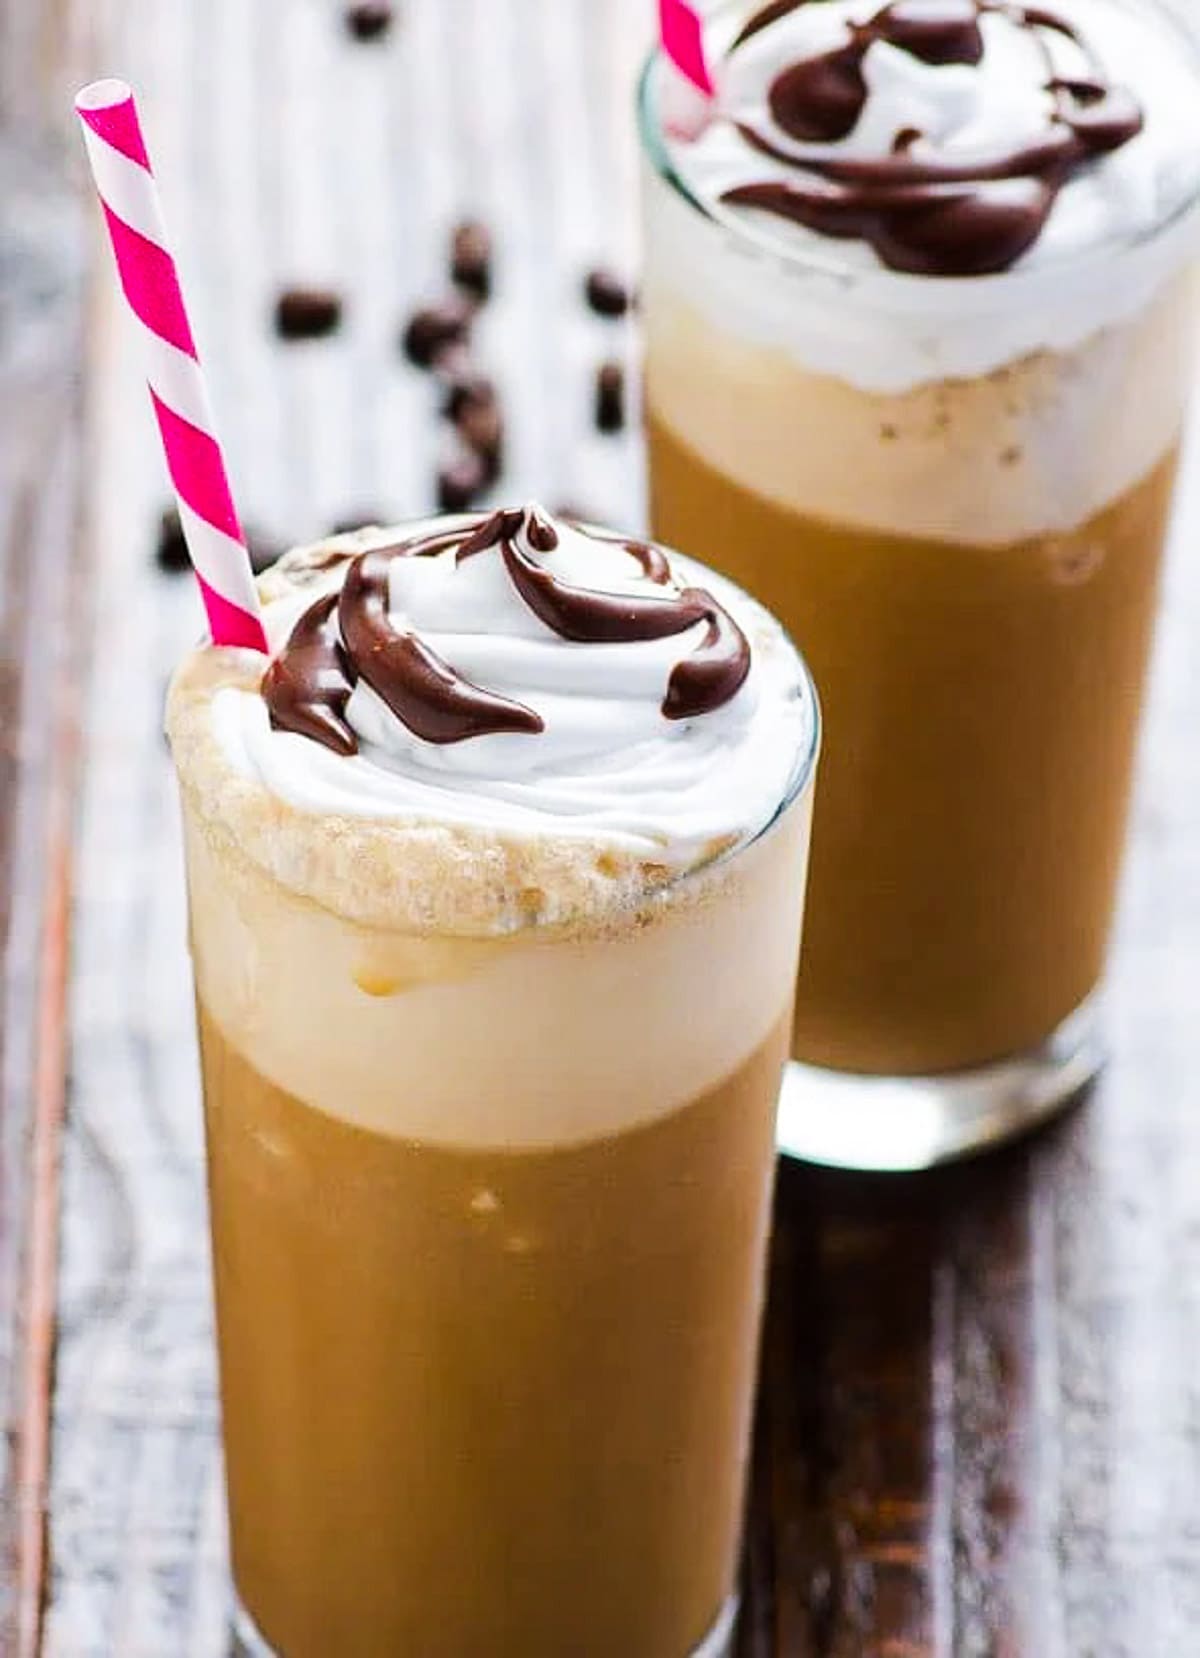 Healthy homemade frappuccino in two glasses with whipped topping, chocolate syrup and straws.